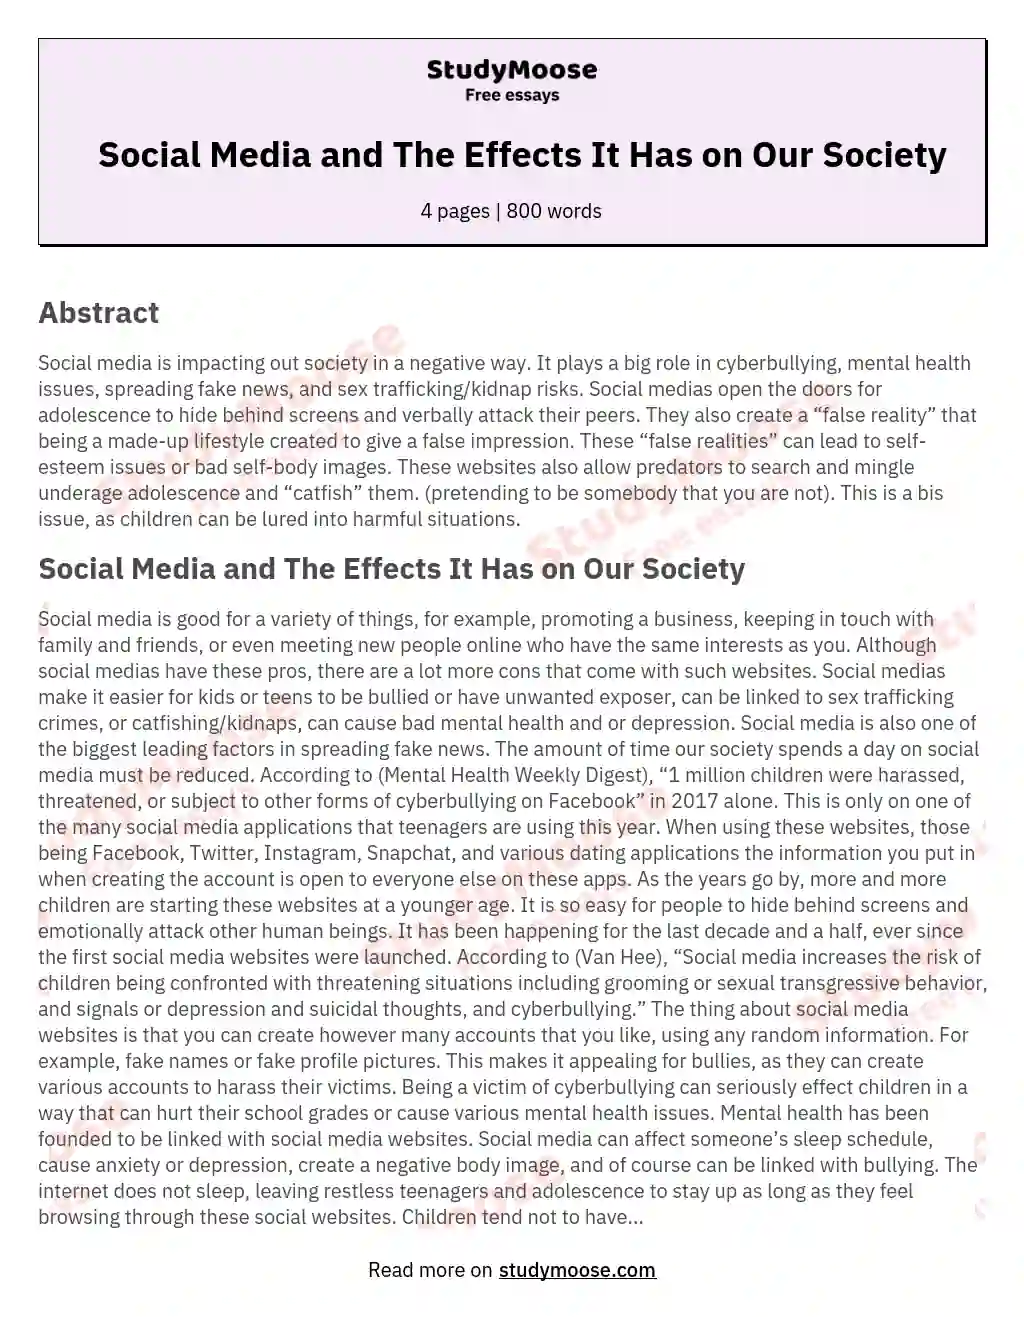   Social Media and The Effects It Has on Our Society